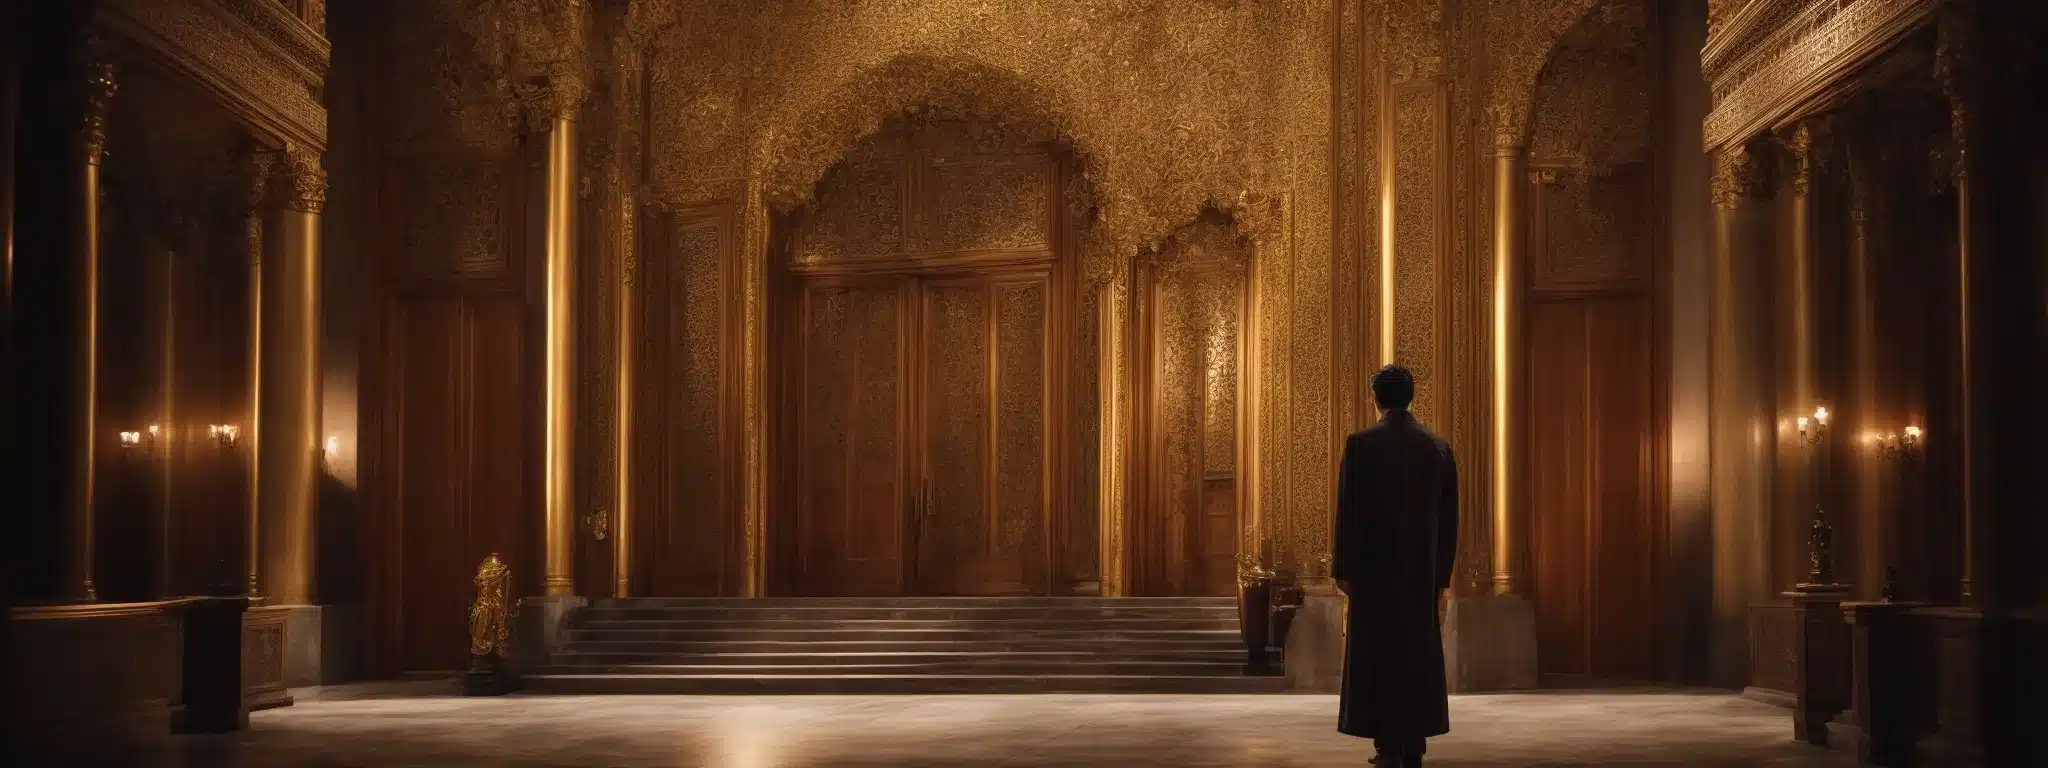 A Noble Figure Stands Before A Grand Door, A Golden Key In Hand, Poised To Unlock The Potential Of A Vast And Labyrinthine Palace Representing Customer Satisfaction.